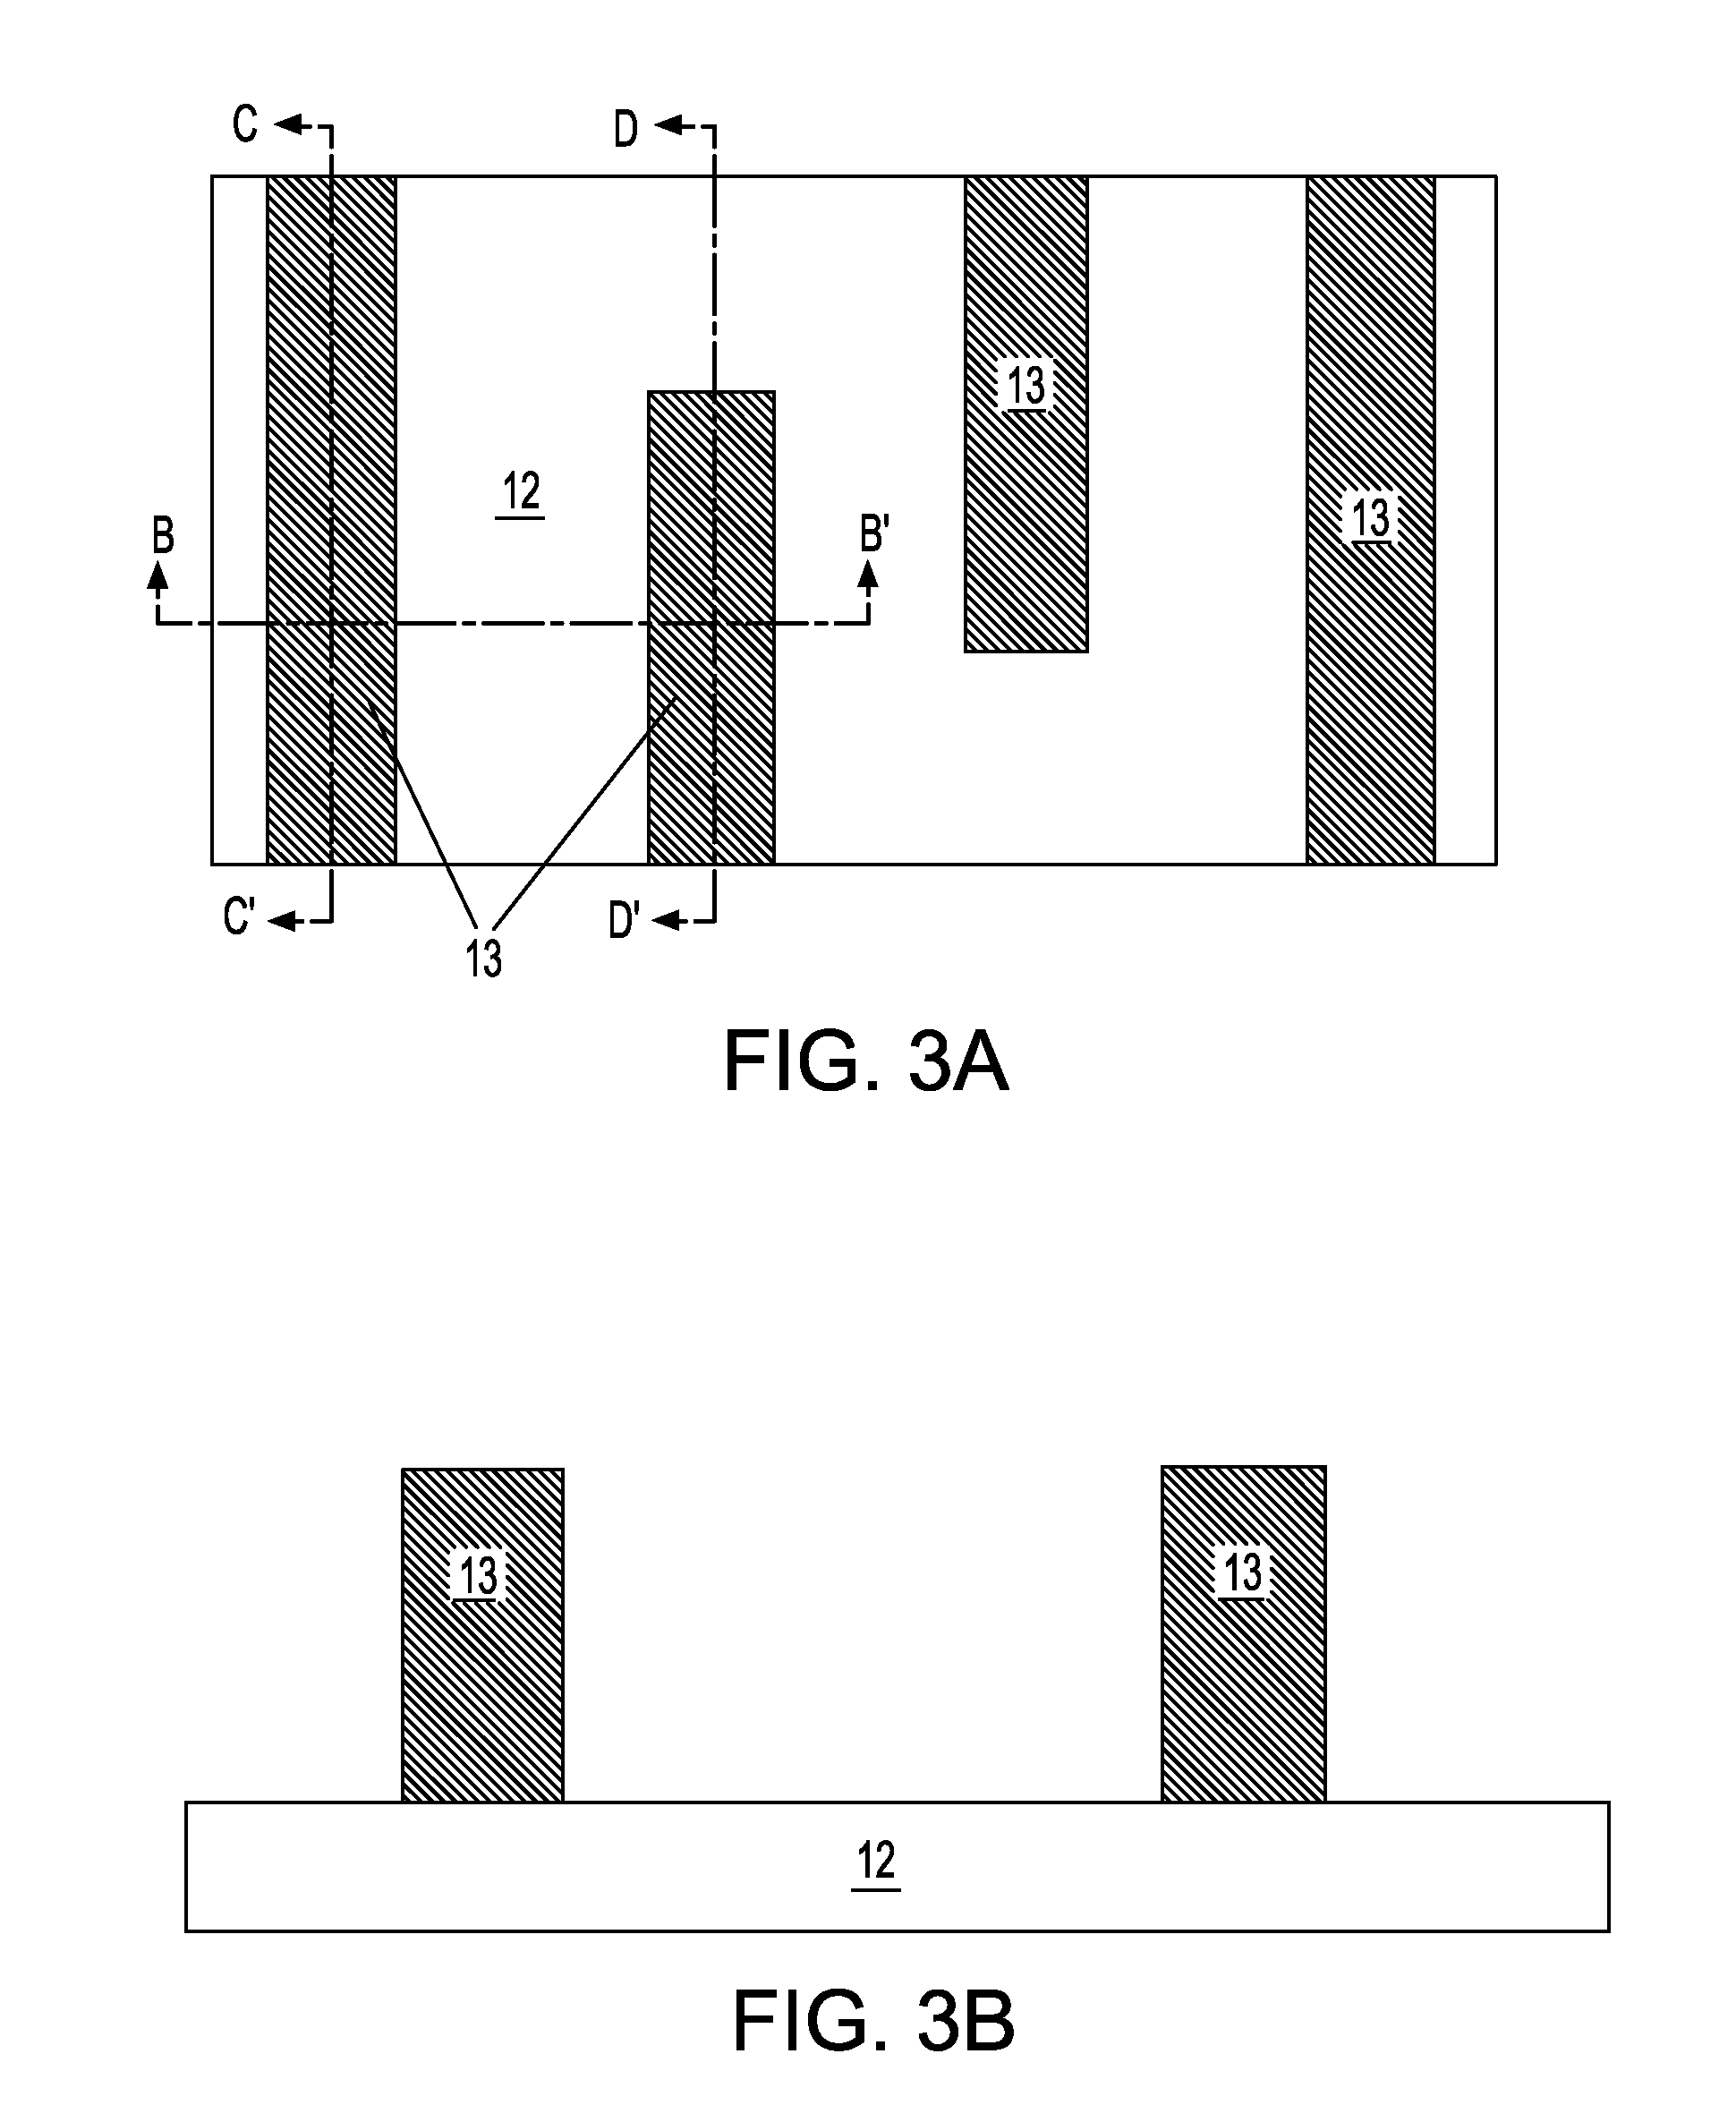 Triple gate and double gate finfets with different vertical dimension fins